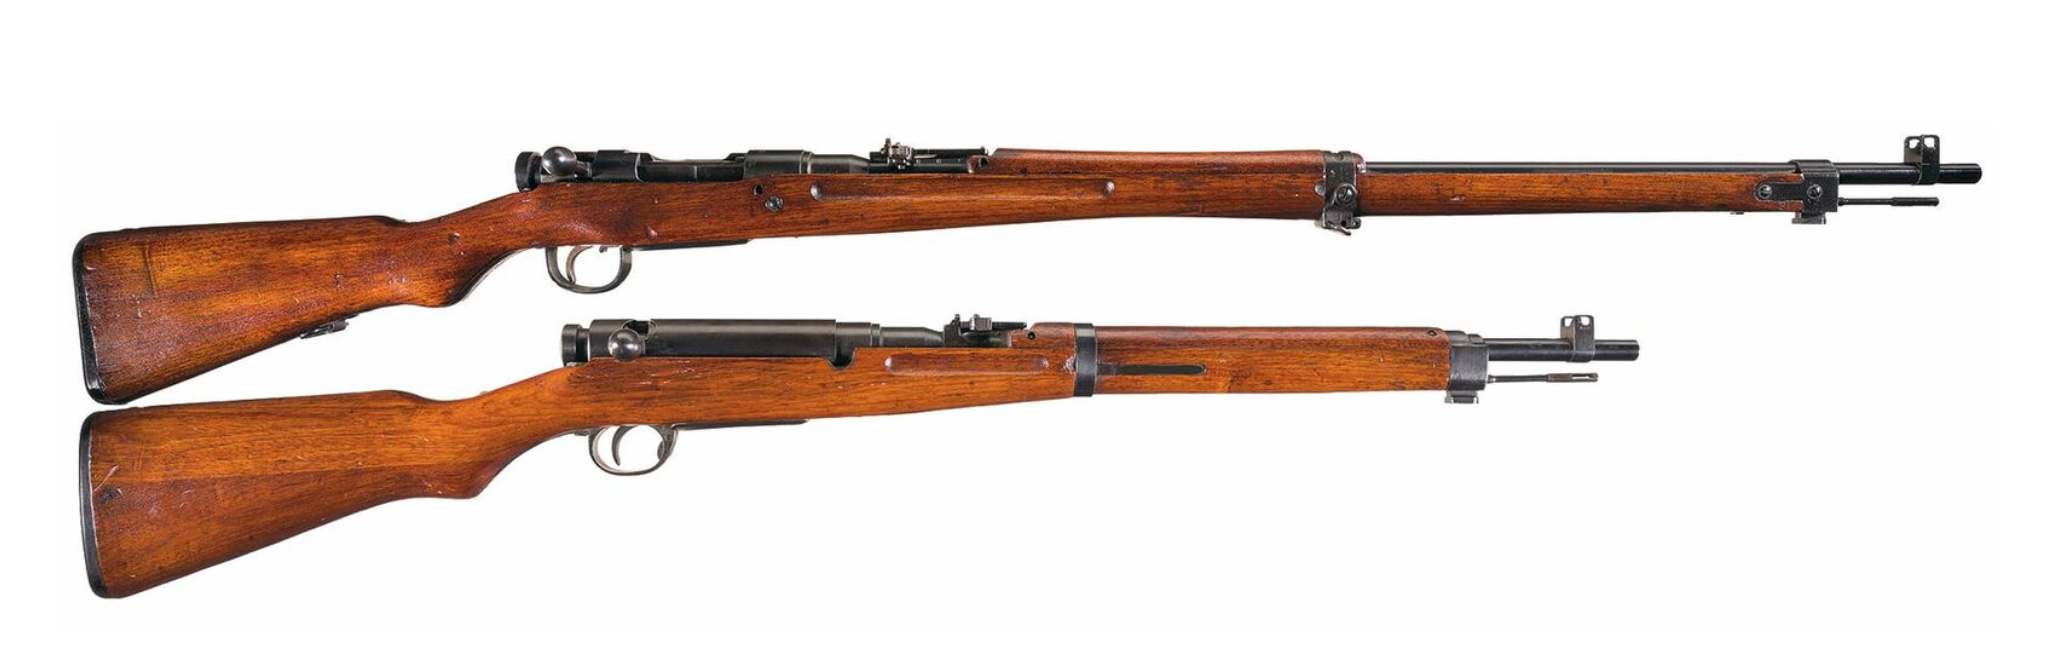 Two Arisaka rifles with bolts.